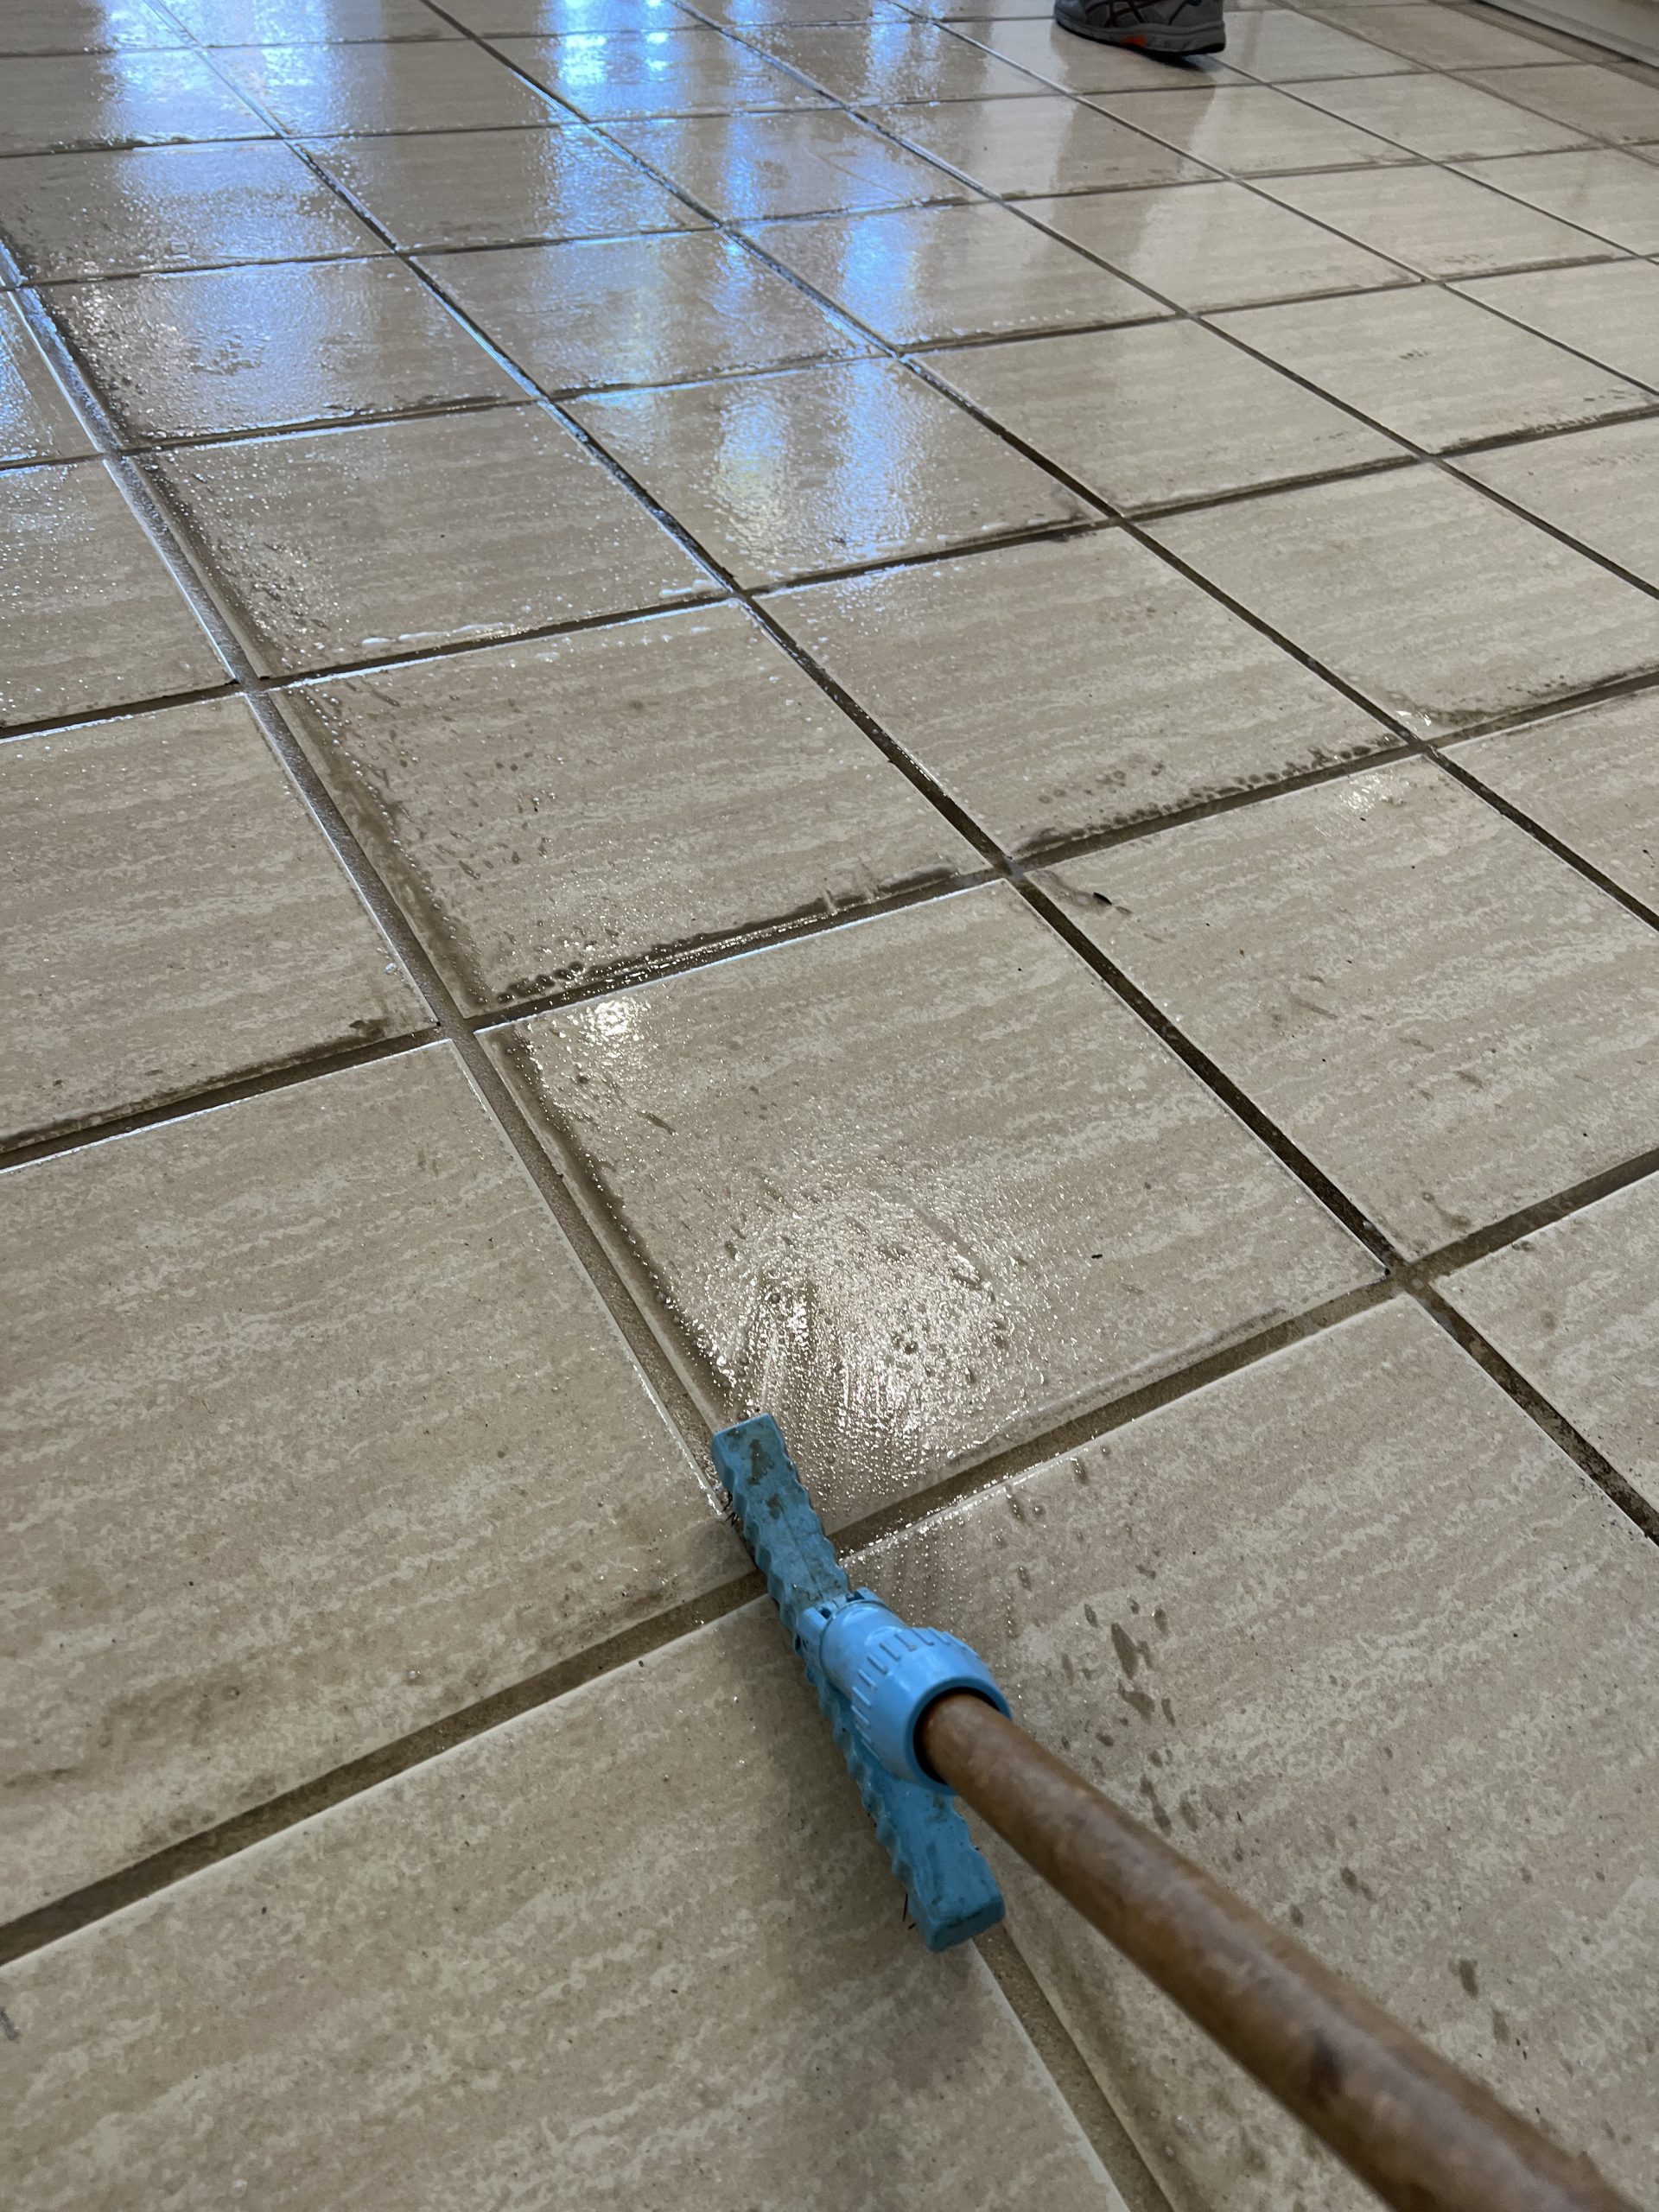 Grout Lines